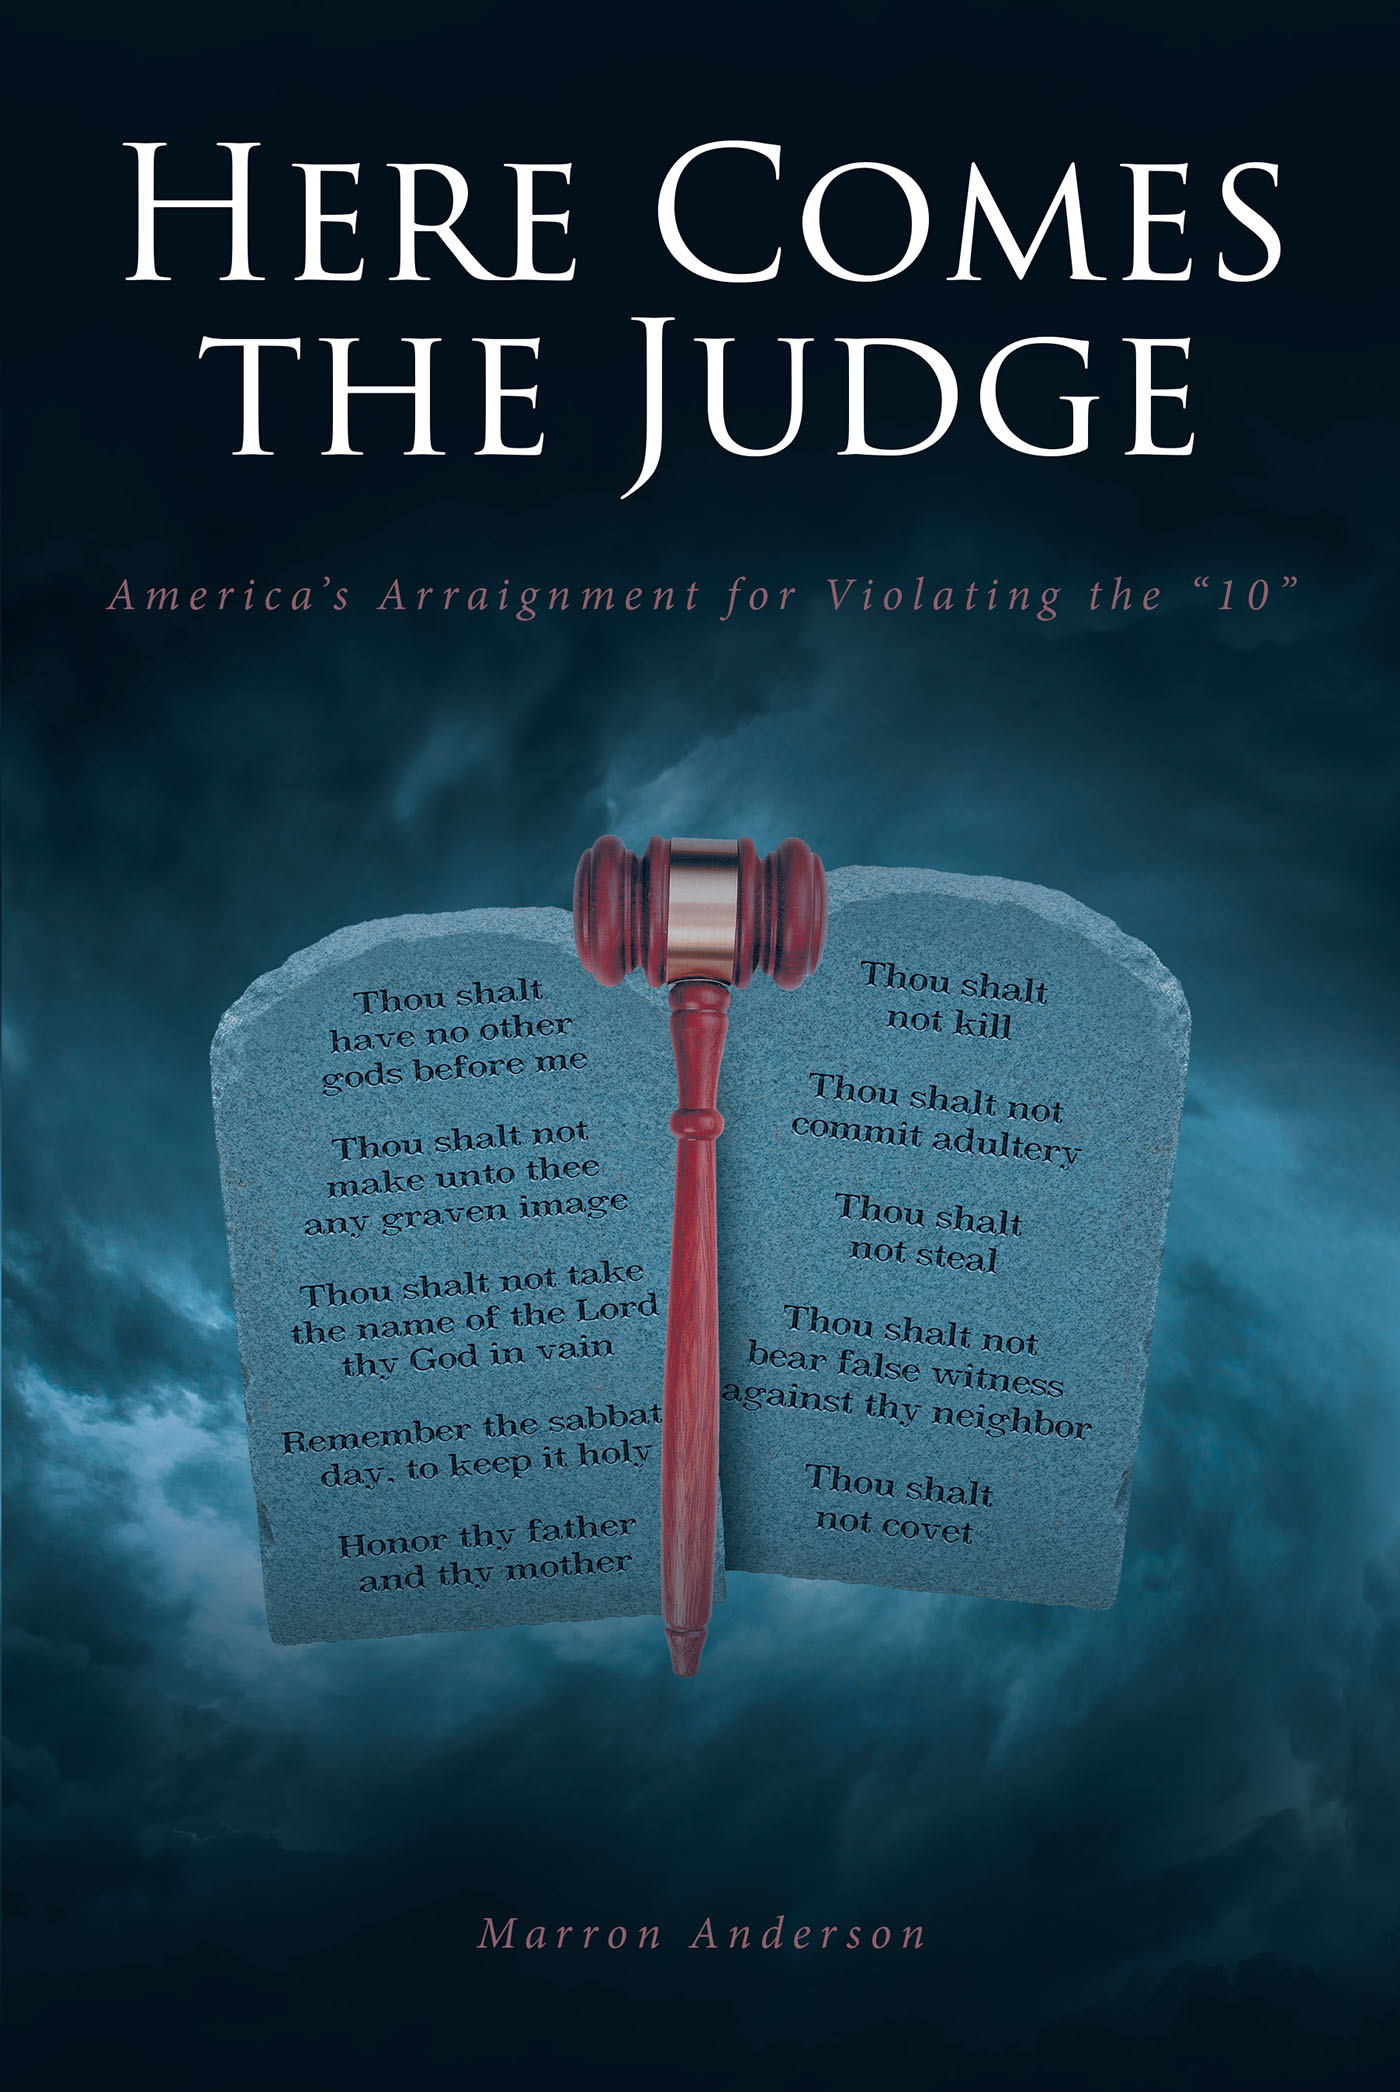 Marron Anderson's New Book, 'Here Comes the Judge', Brings